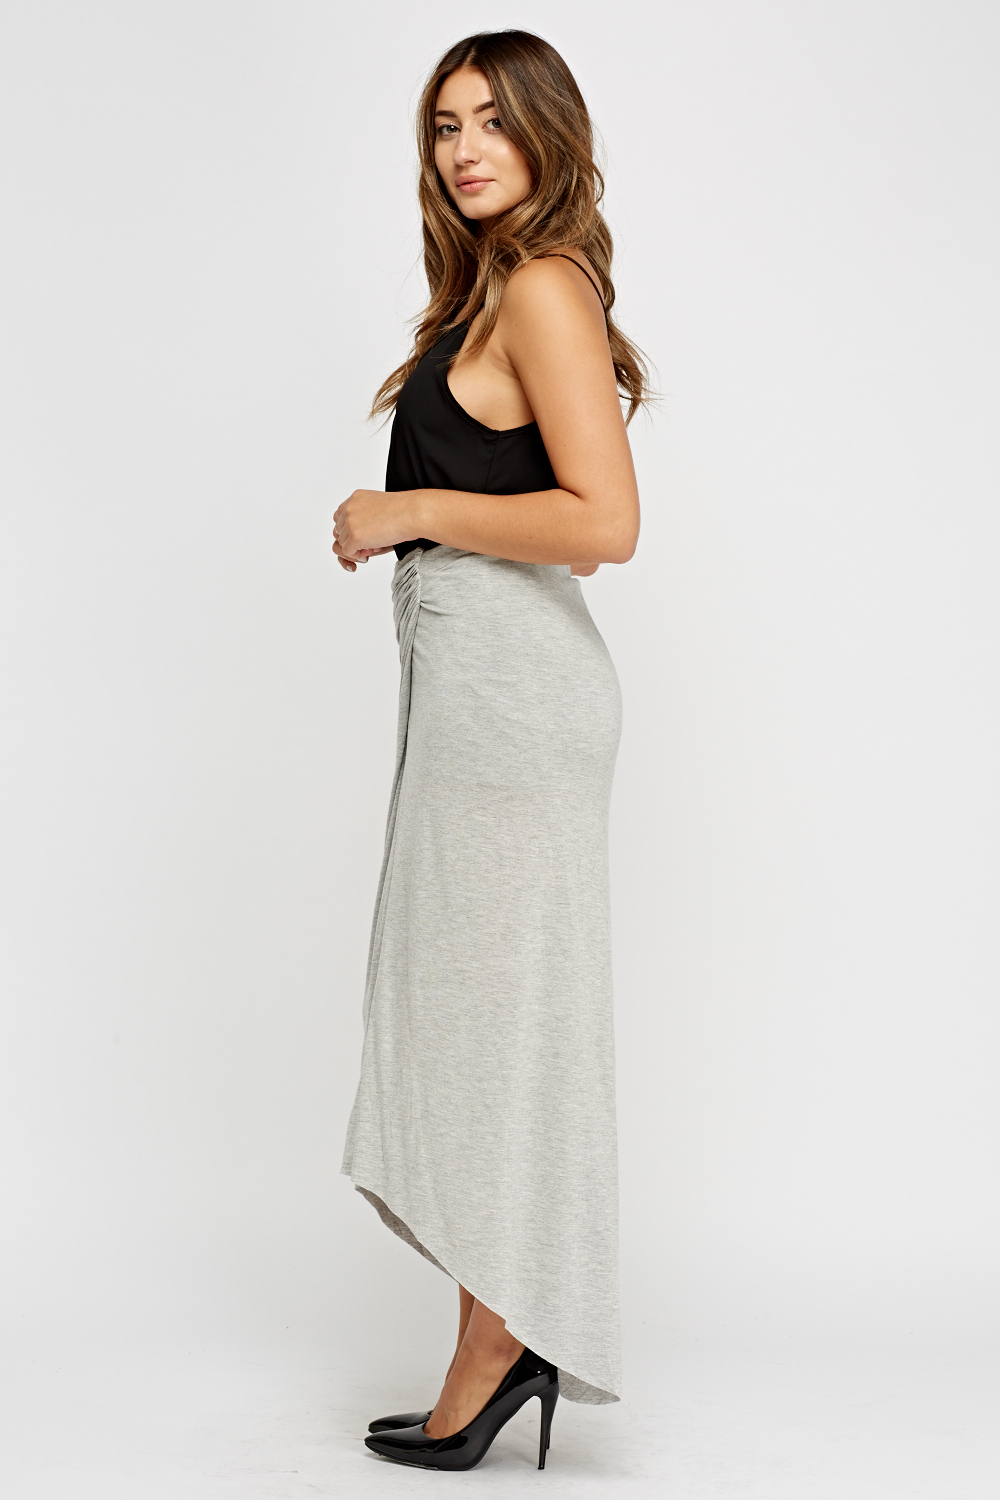 Ruched Grey Bodycon Maxi Skirt - Just $6